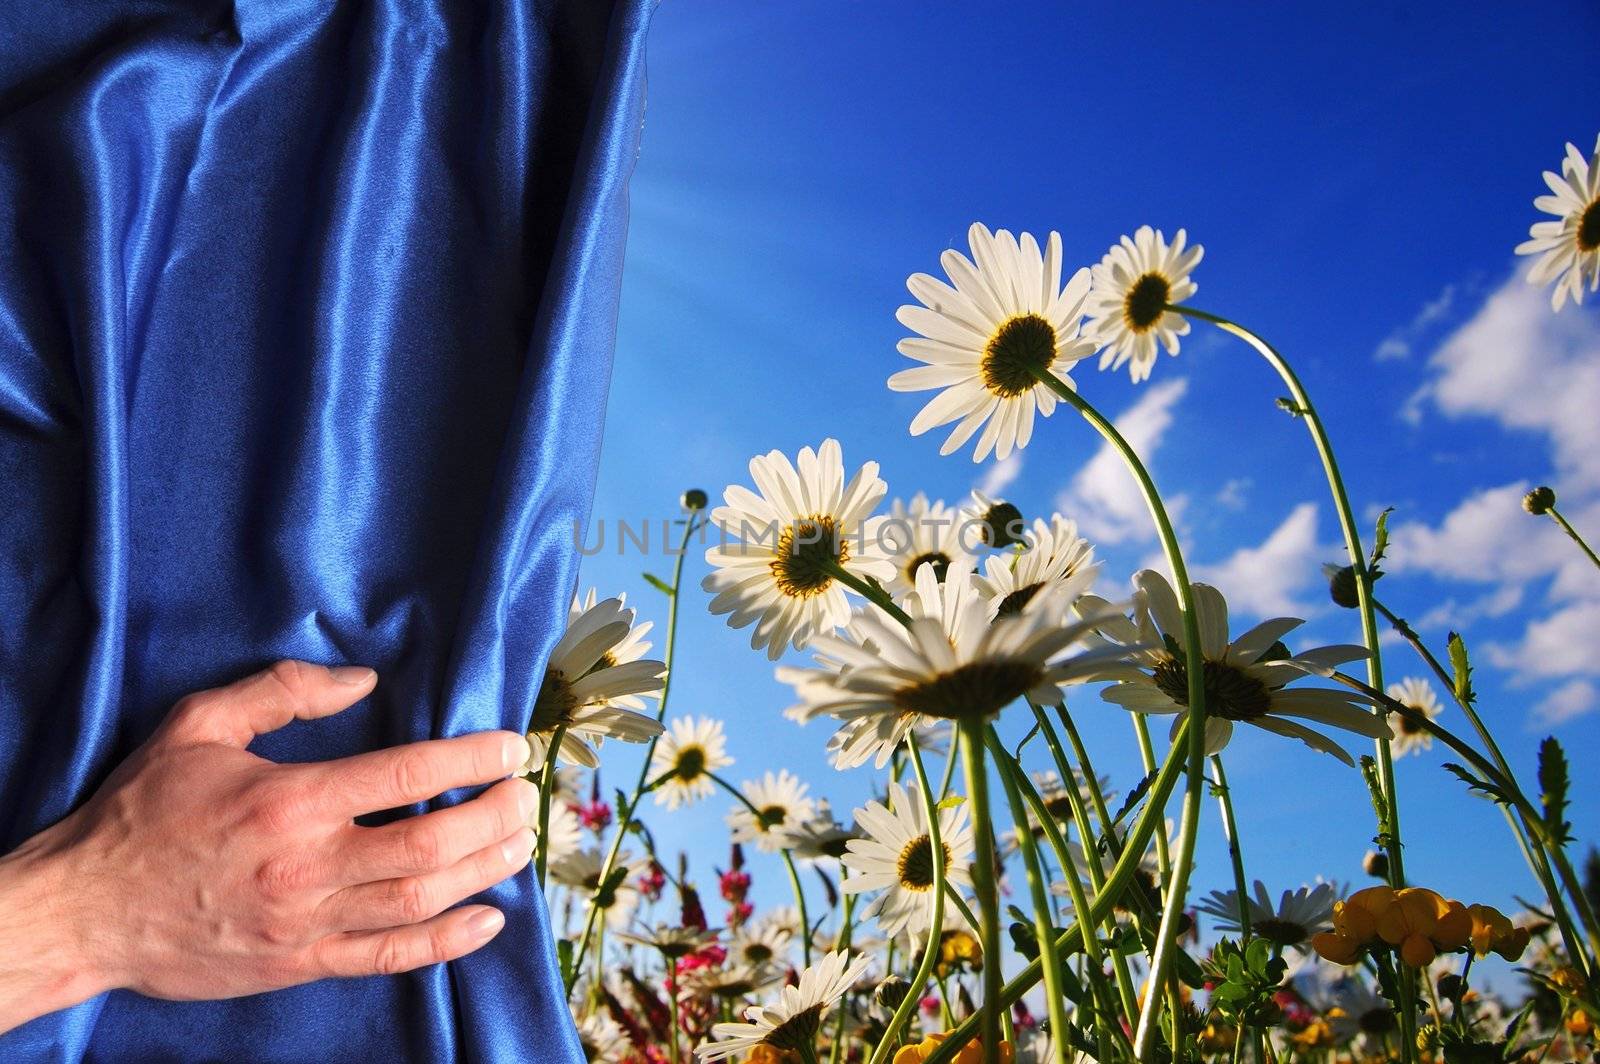 view to summer flowers behind a blue curtain showing happiness